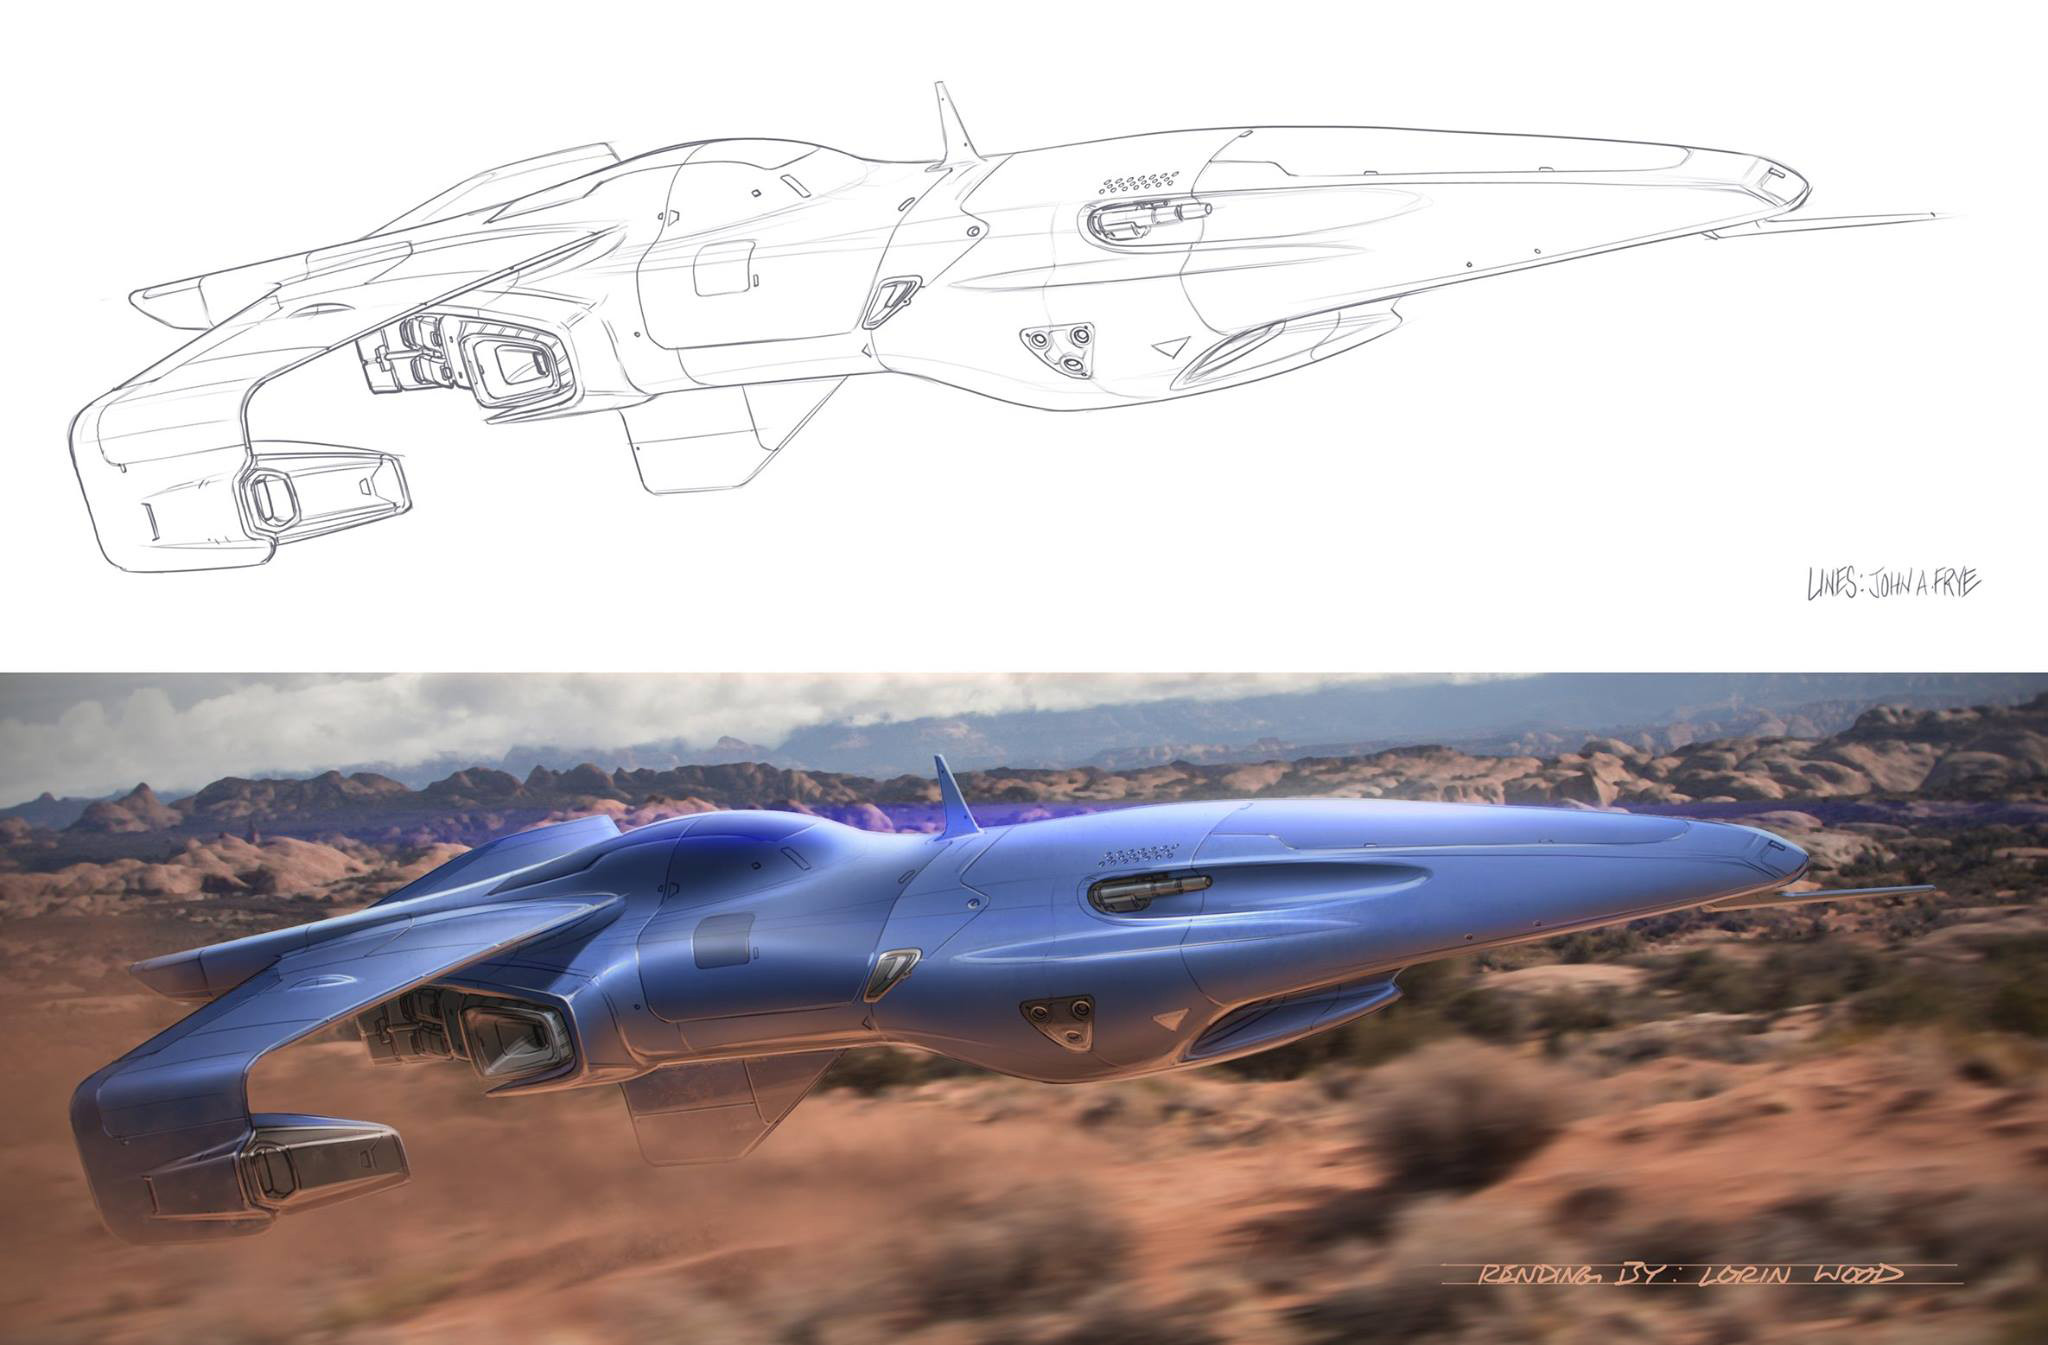 The Lorin Wood swap. My line drawing, digital work and Lorin's color concept- a deep chrome reflecting the blur of sagebrush on a low level pass over a desert and a dark blue zenith sky. https://www.artstation.com/artist/lwoodesign